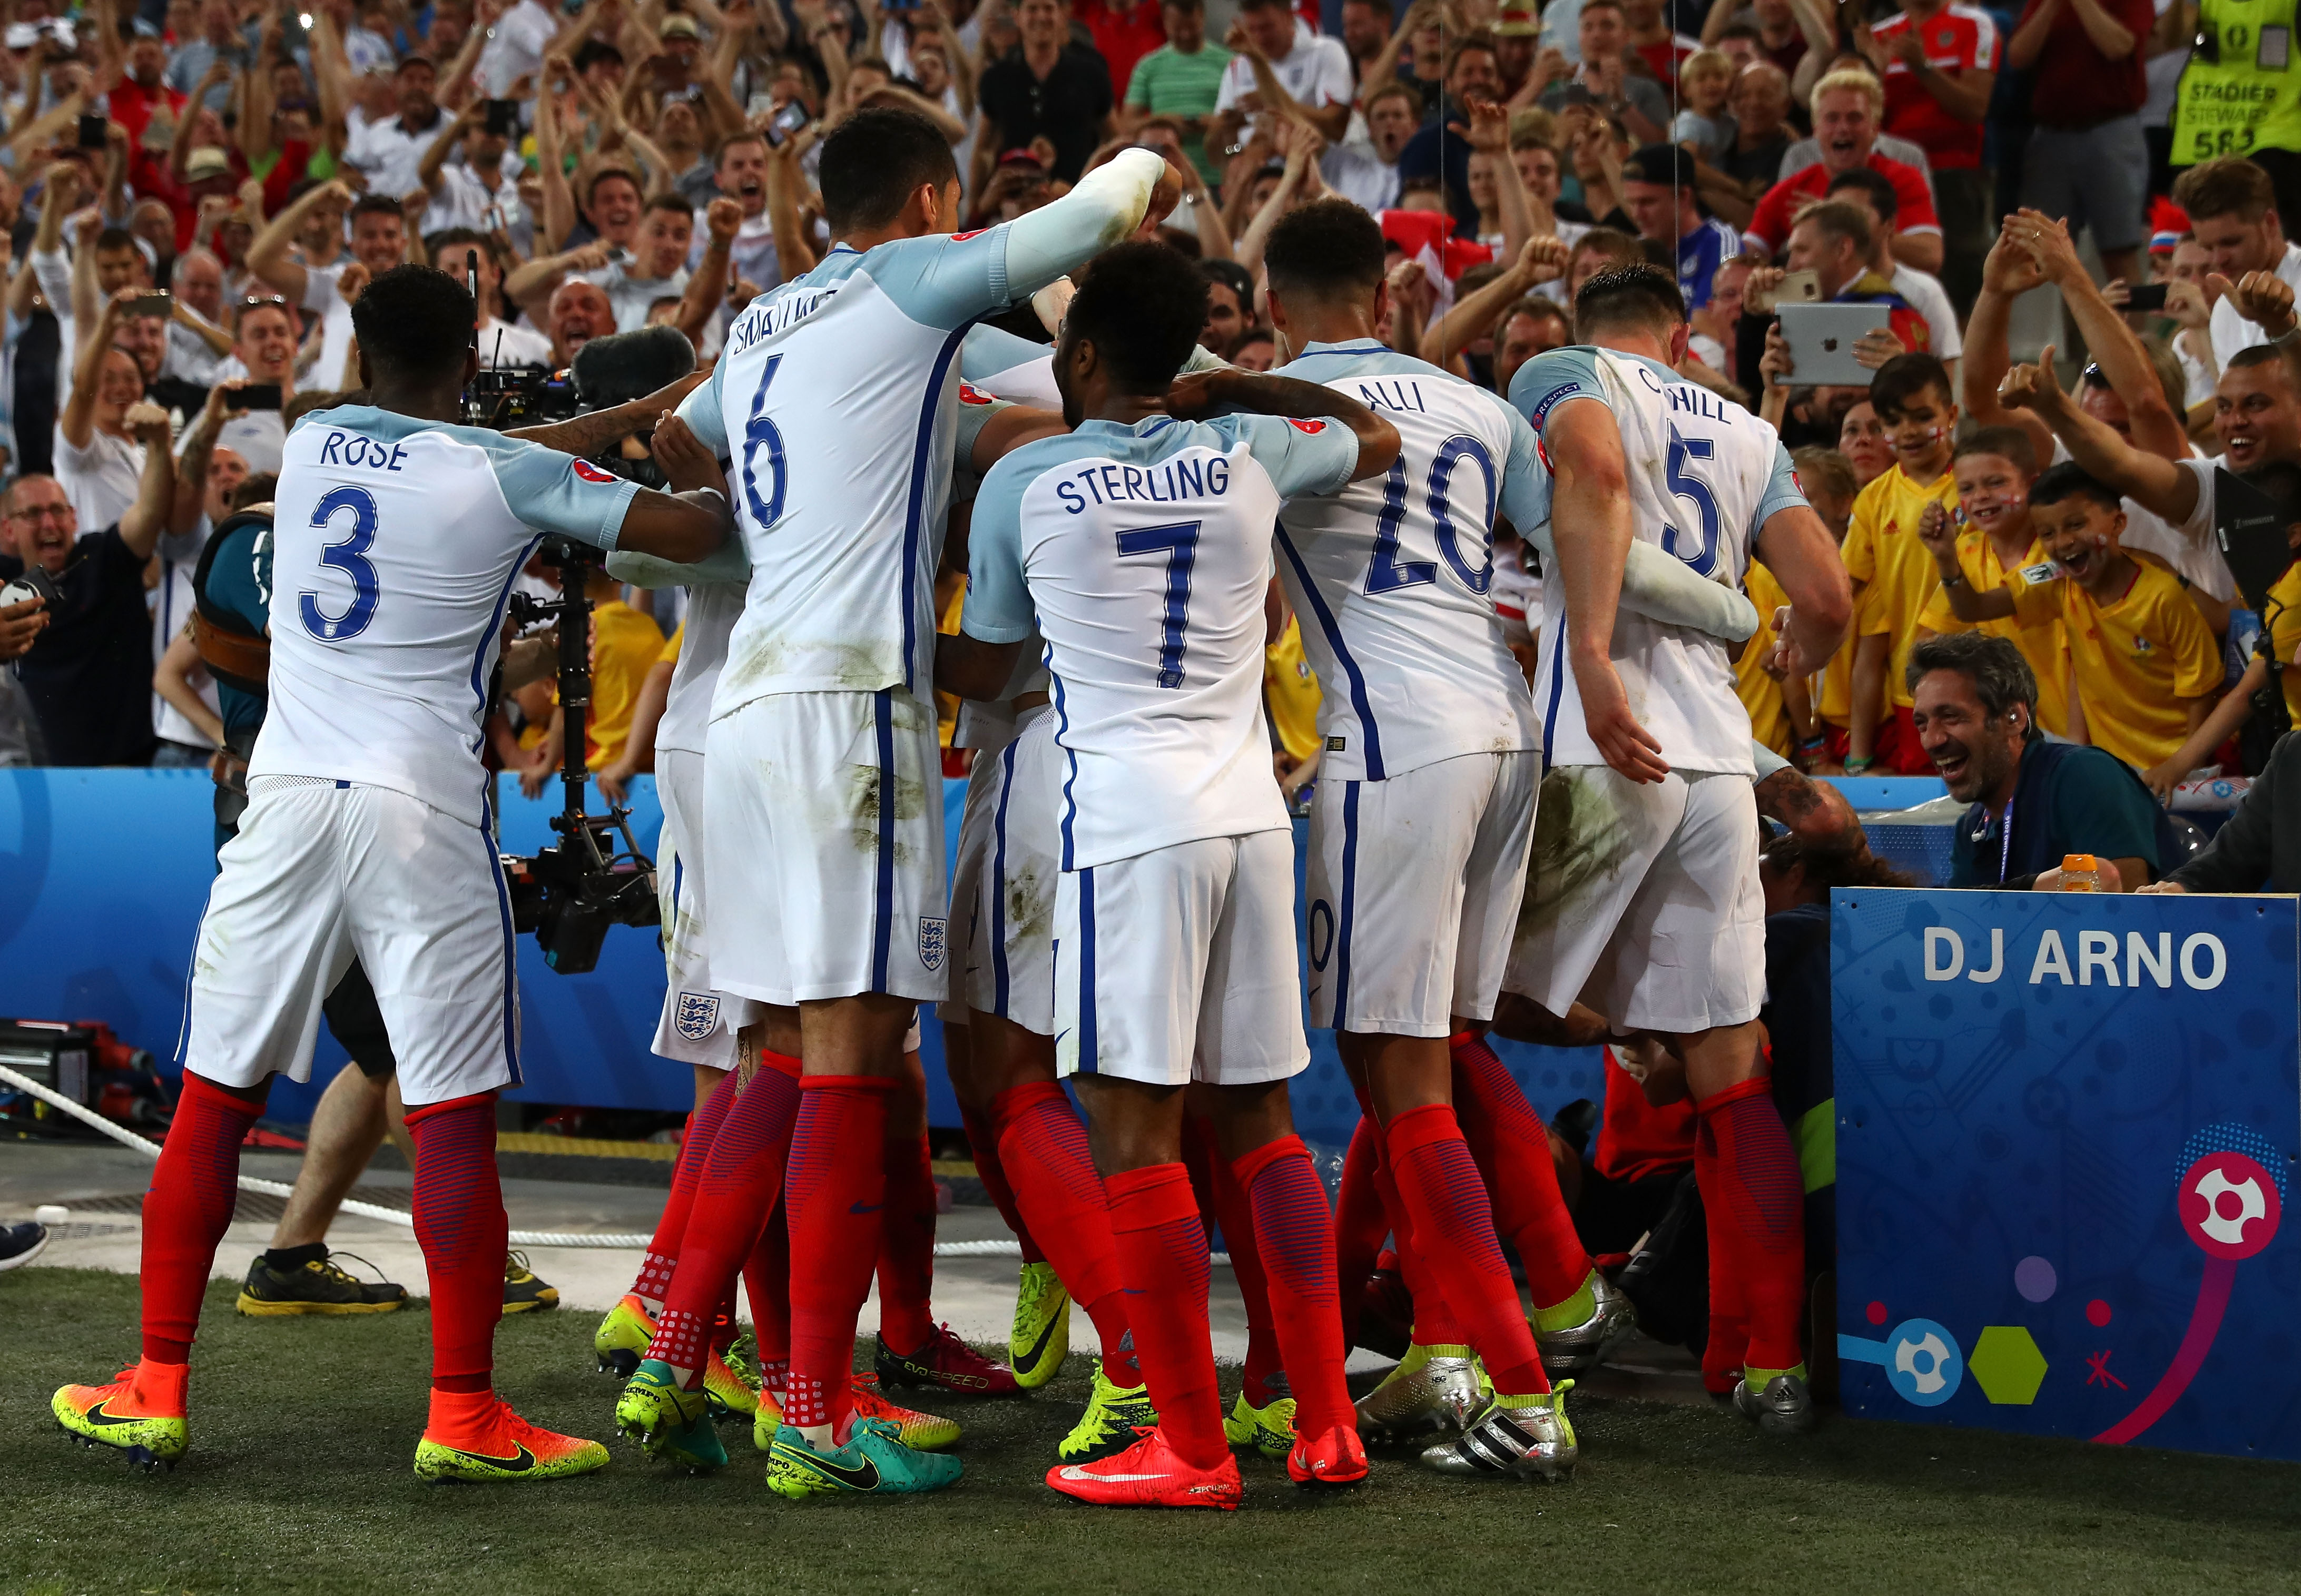 MARSEILLE, FRANCE - JUNE 11: England players celebrate their first goal during the UEFA EURO 2016 Group B match between England and Russia at Stade Velodrome on June 11, 2016 in Marseille, France.  (Photo by Lars Baron/Getty Images)